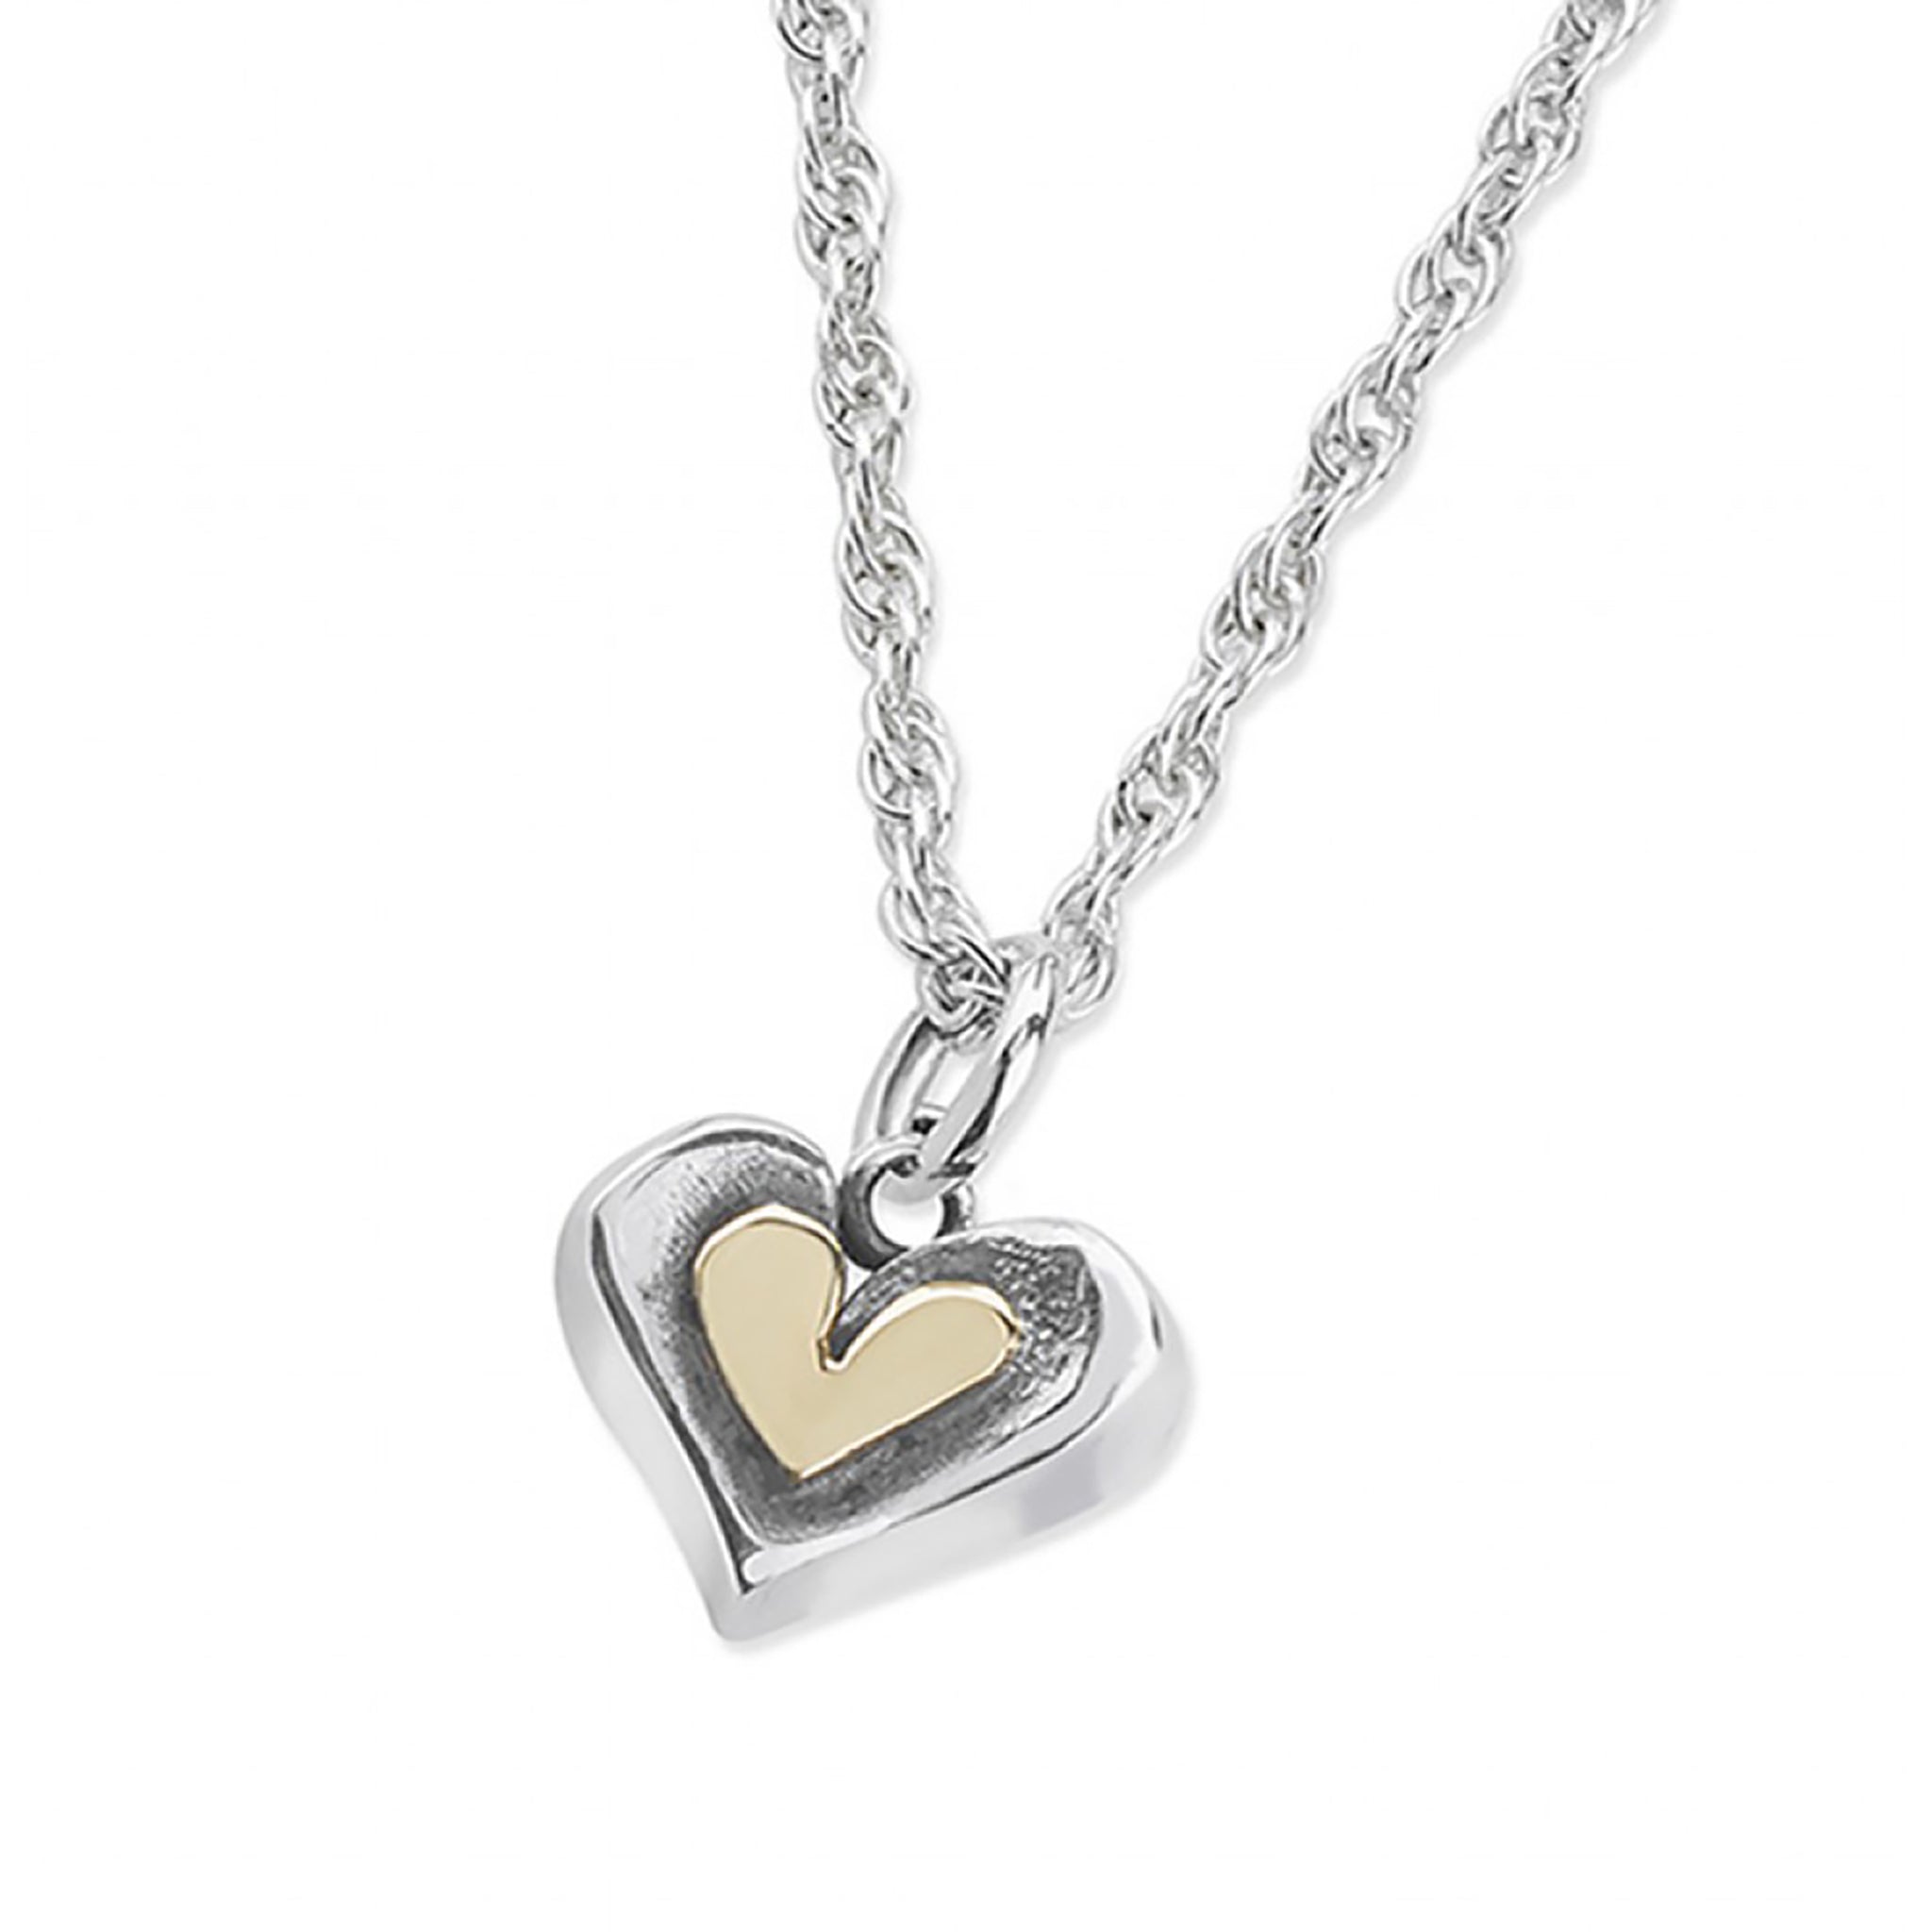 Silver pendant in illustrative heart shape with gold heart centre on a silver chain